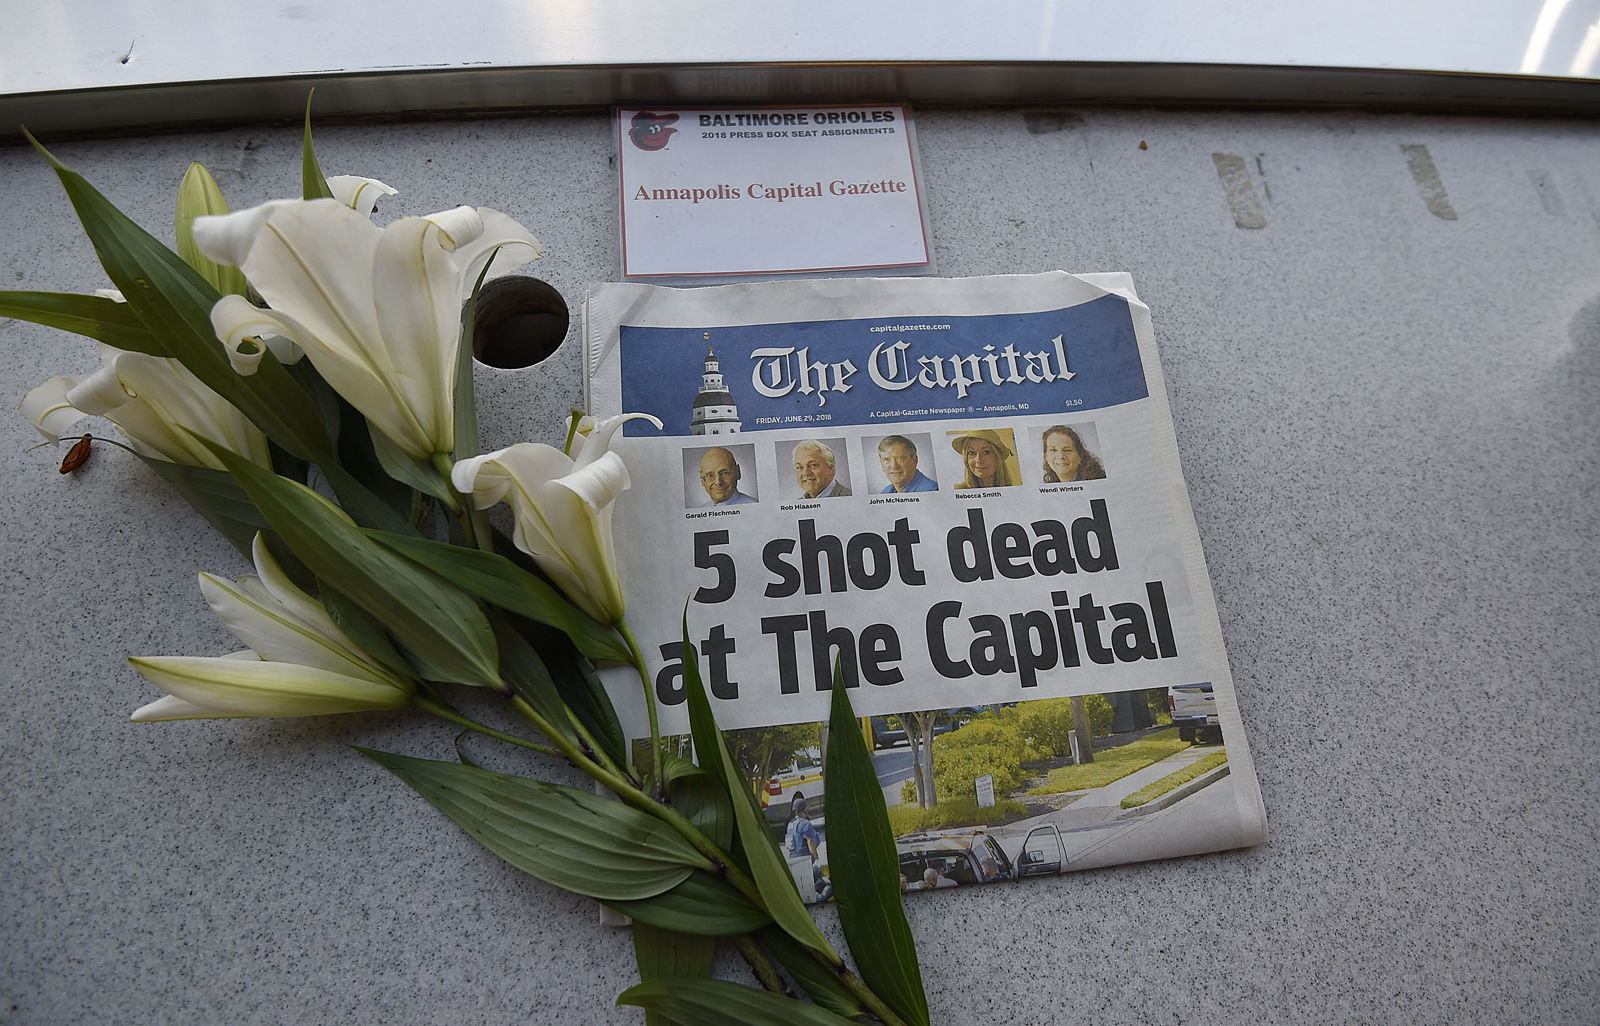 A memorial for Capital Gazette sports writer John McNamara is displayed at a seat in the press box before a baseball game between the Baltimore Orioles and the Los Angeles Angels, Friday, June 29, 2018, in Baltimore. McNamara is one of five victims in a  shooting in the newspaper's newsroom Thursday in Annapolis, Md. (AP Photo/Gail Burton)